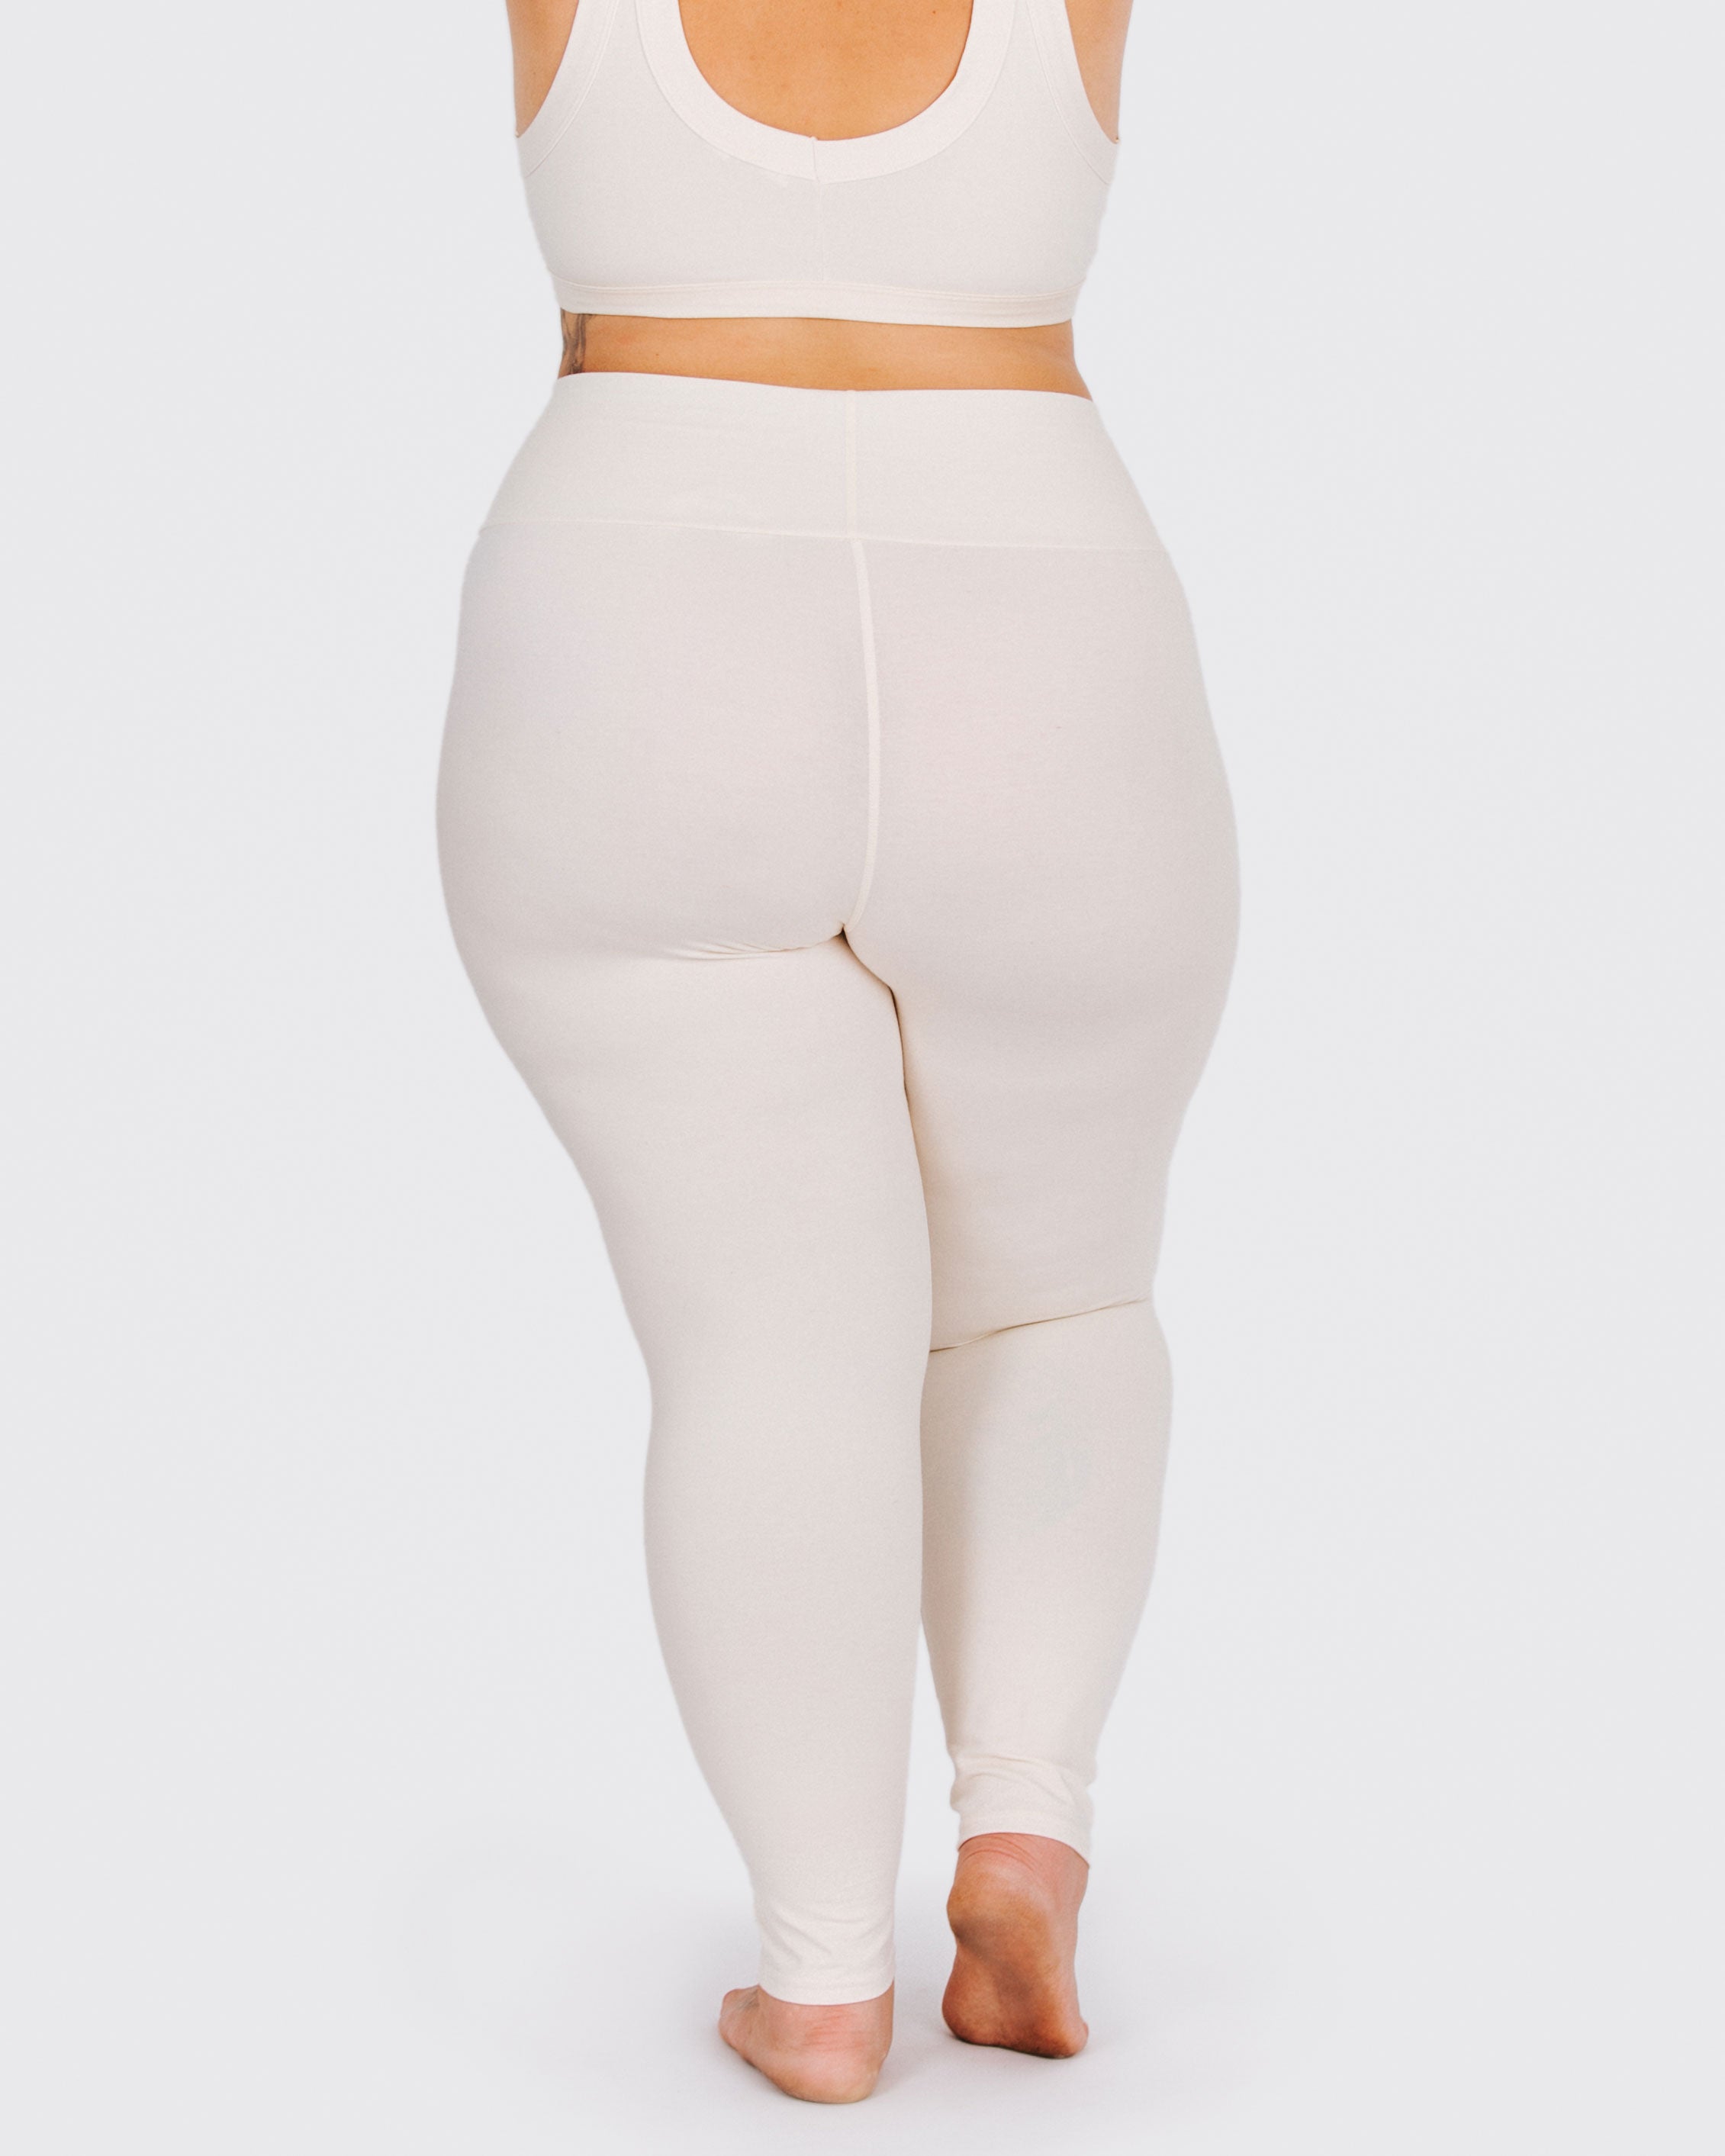 Fit photo from the back of Thunderpants organic cotton Leggings in off-white on a model.